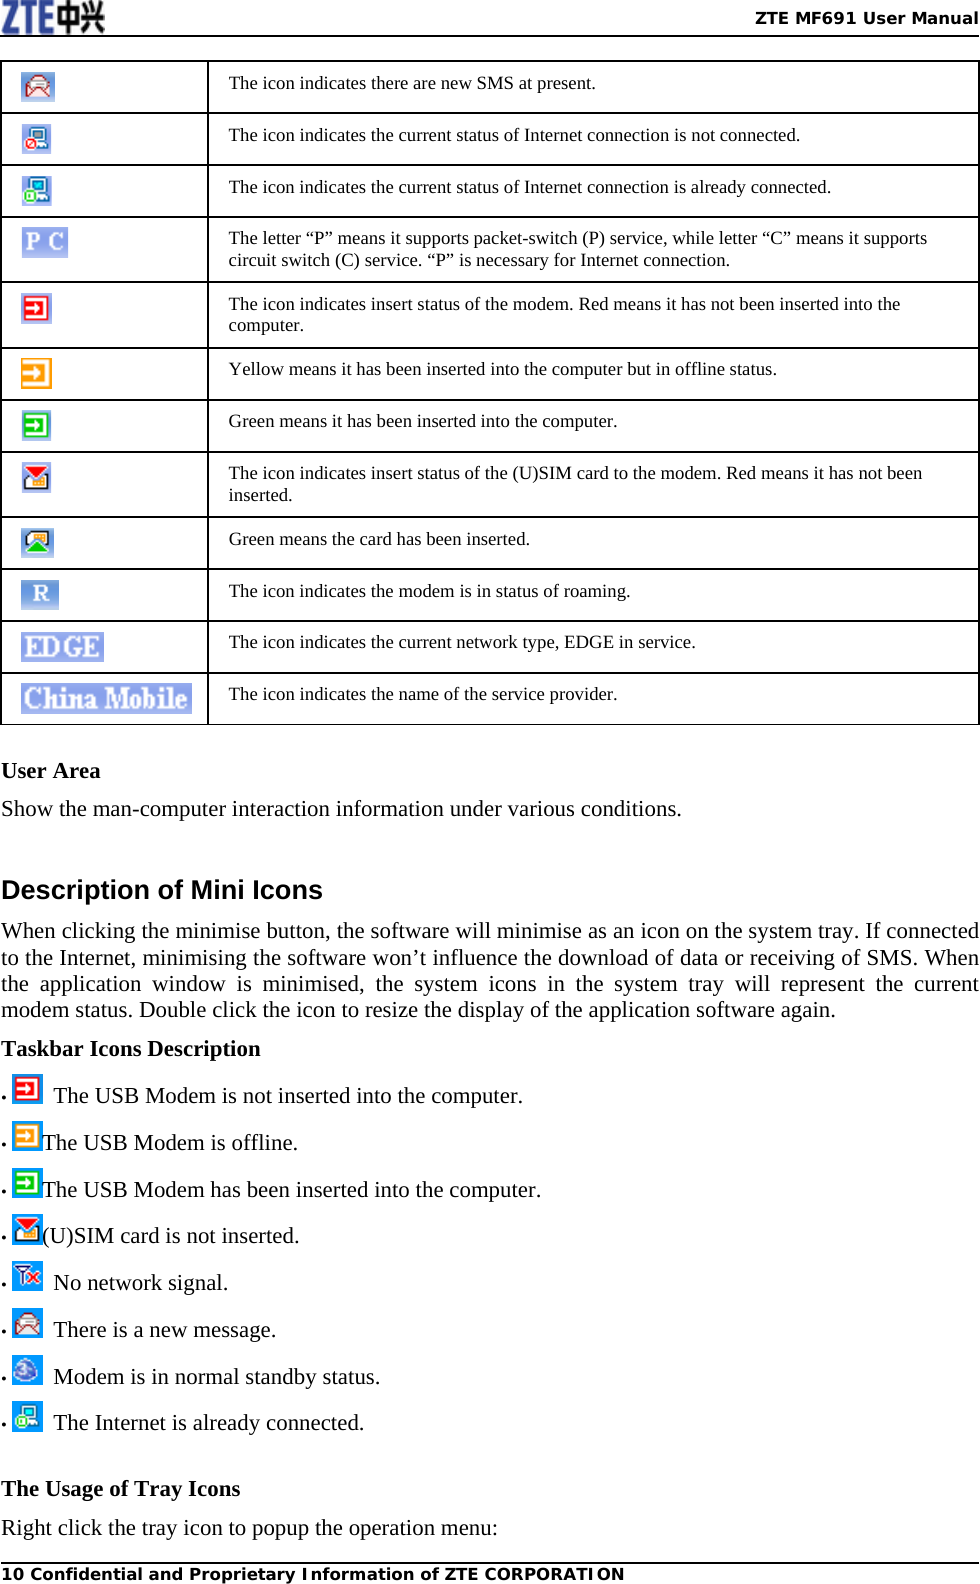   ZTE MF691 User Manual10 Confidential and Proprietary Information of ZTE CORPORATION The icon indicates there are new SMS at present.  The icon indicates the current status of Internet connection is not connected.  The icon indicates the current status of Internet connection is already connected.  The letter “P” means it supports packet-switch (P) service, while letter “C” means it supports circuit switch (C) service. “P” is necessary for Internet connection.  The icon indicates insert status of the modem. Red means it has not been inserted into the computer.  Yellow means it has been inserted into the computer but in offline status.  Green means it has been inserted into the computer.  The icon indicates insert status of the (U)SIM card to the modem. Red means it has not been inserted.  Green means the card has been inserted.  The icon indicates the modem is in status of roaming.  The icon indicates the current network type, EDGE in service.  The icon indicates the name of the service provider.   User Area Show the man-computer interaction information under various conditions.  Description of Mini Icons When clicking the minimise button, the software will minimise as an icon on the system tray. If connected to the Internet, minimising the software won’t influence the download of data or receiving of SMS. When the application window is minimised, the system icons in the system tray will represent the current modem status. Double click the icon to resize the display of the application software again. Taskbar Icons Description •   The USB Modem is not inserted into the computer. • The USB Modem is offline. • The USB Modem has been inserted into the computer. • (U)SIM card is not inserted.   •   No network signal. •   There is a new message. •   Modem is in normal standby status. •   The Internet is already connected.  The Usage of Tray Icons Right click the tray icon to popup the operation menu: 